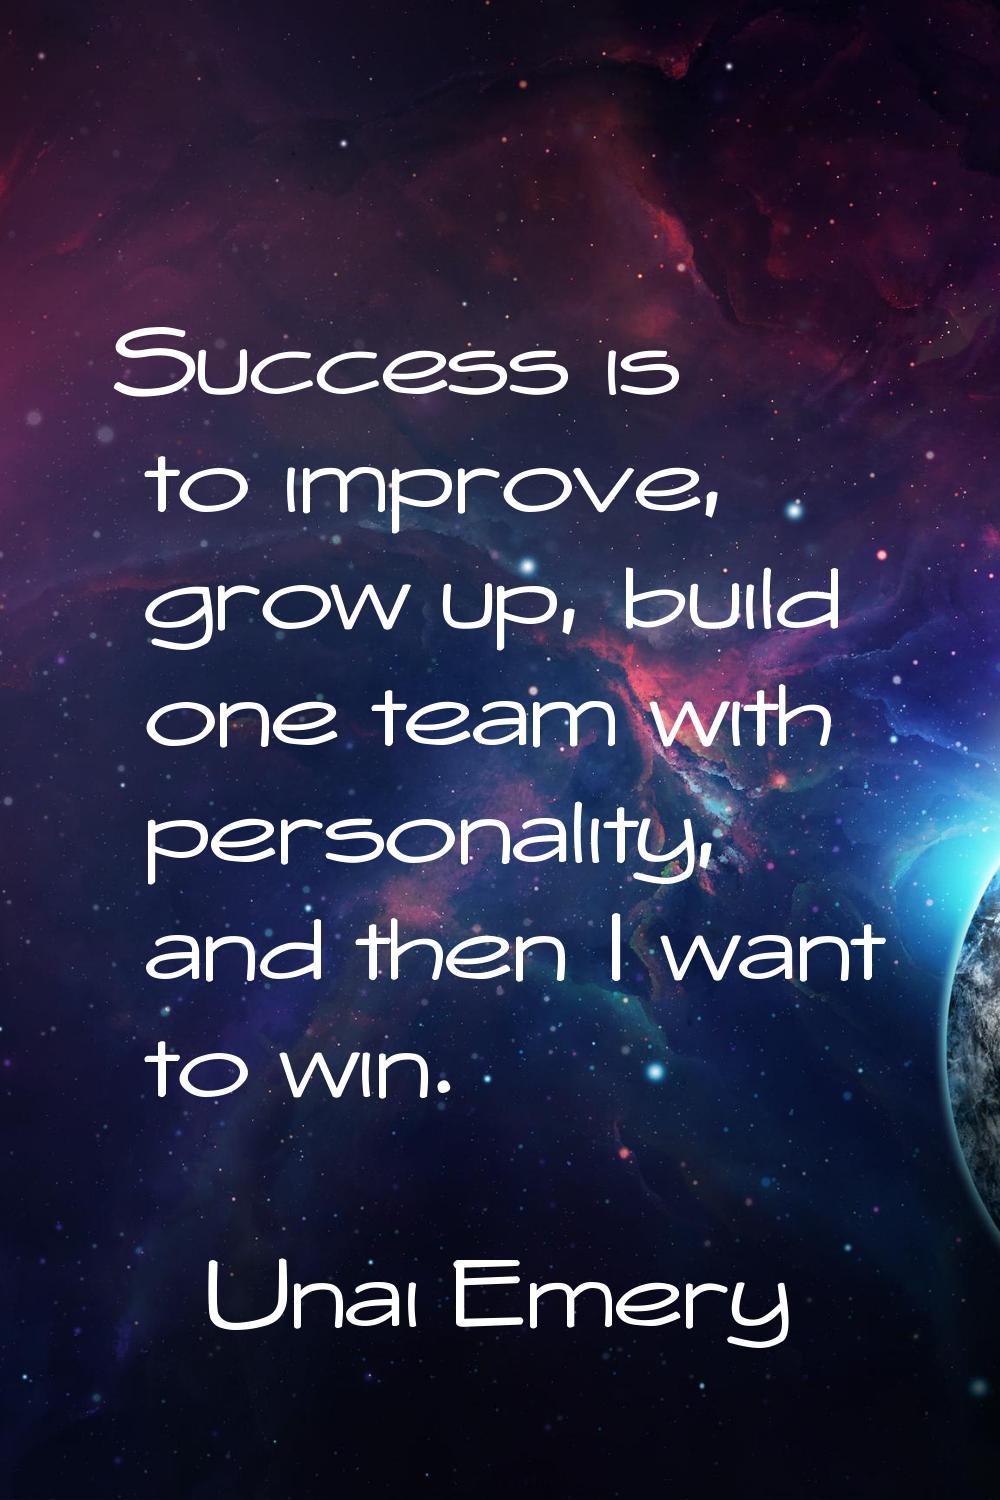 Success is to improve, grow up, build one team with personality, and then I want to win.